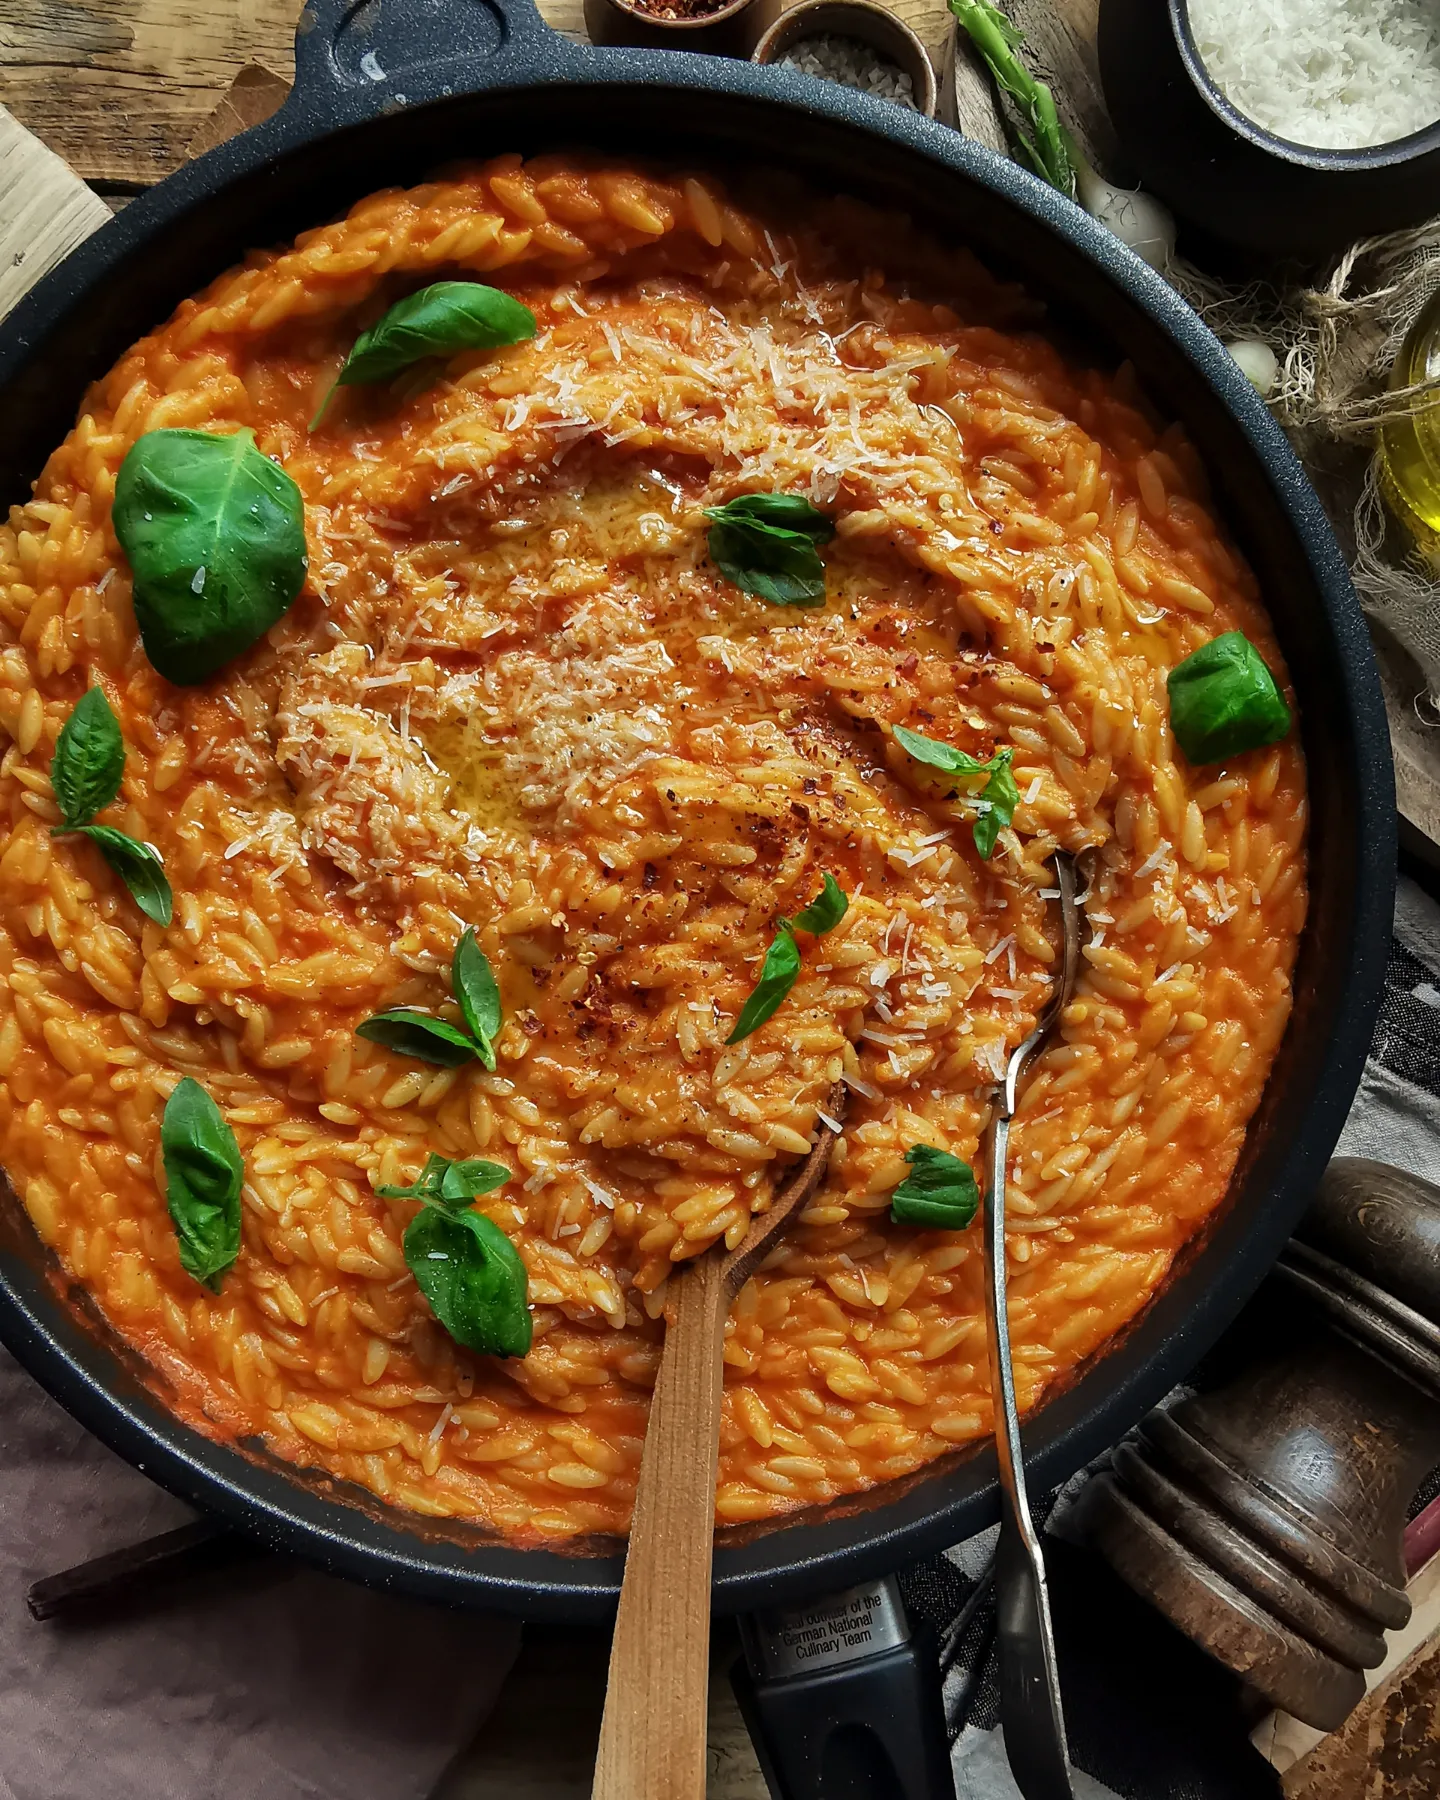 Orzo pasta in creamy roasted yellow and red pepper sauce